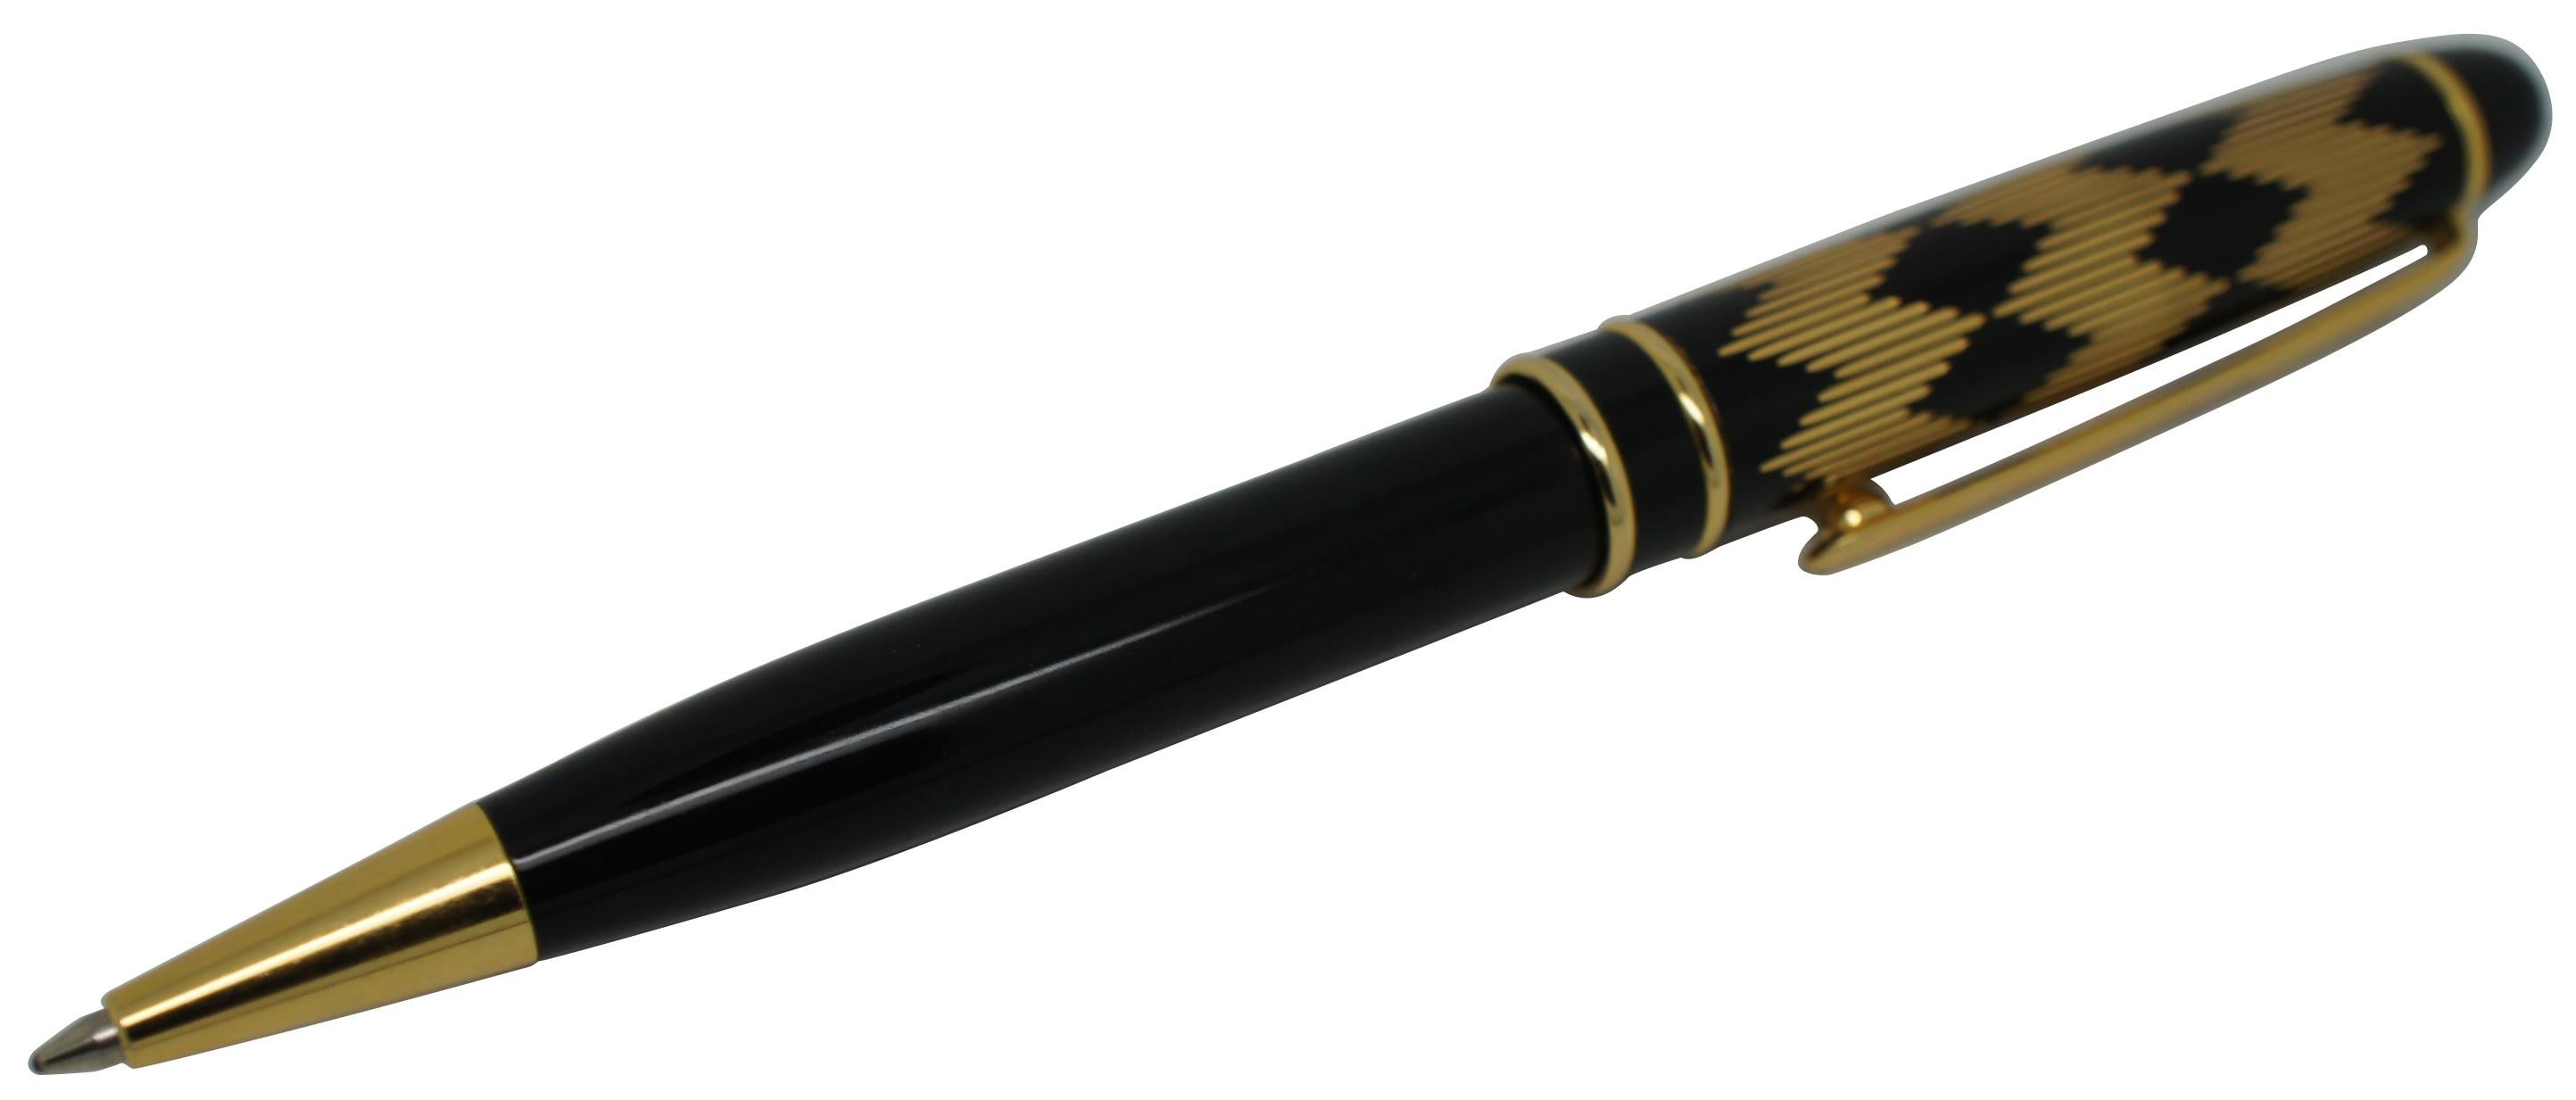 Vintage Montblanc Solitaire ballpoint pen in black with a gold hatch mark diamond pattern on the barrel.
 